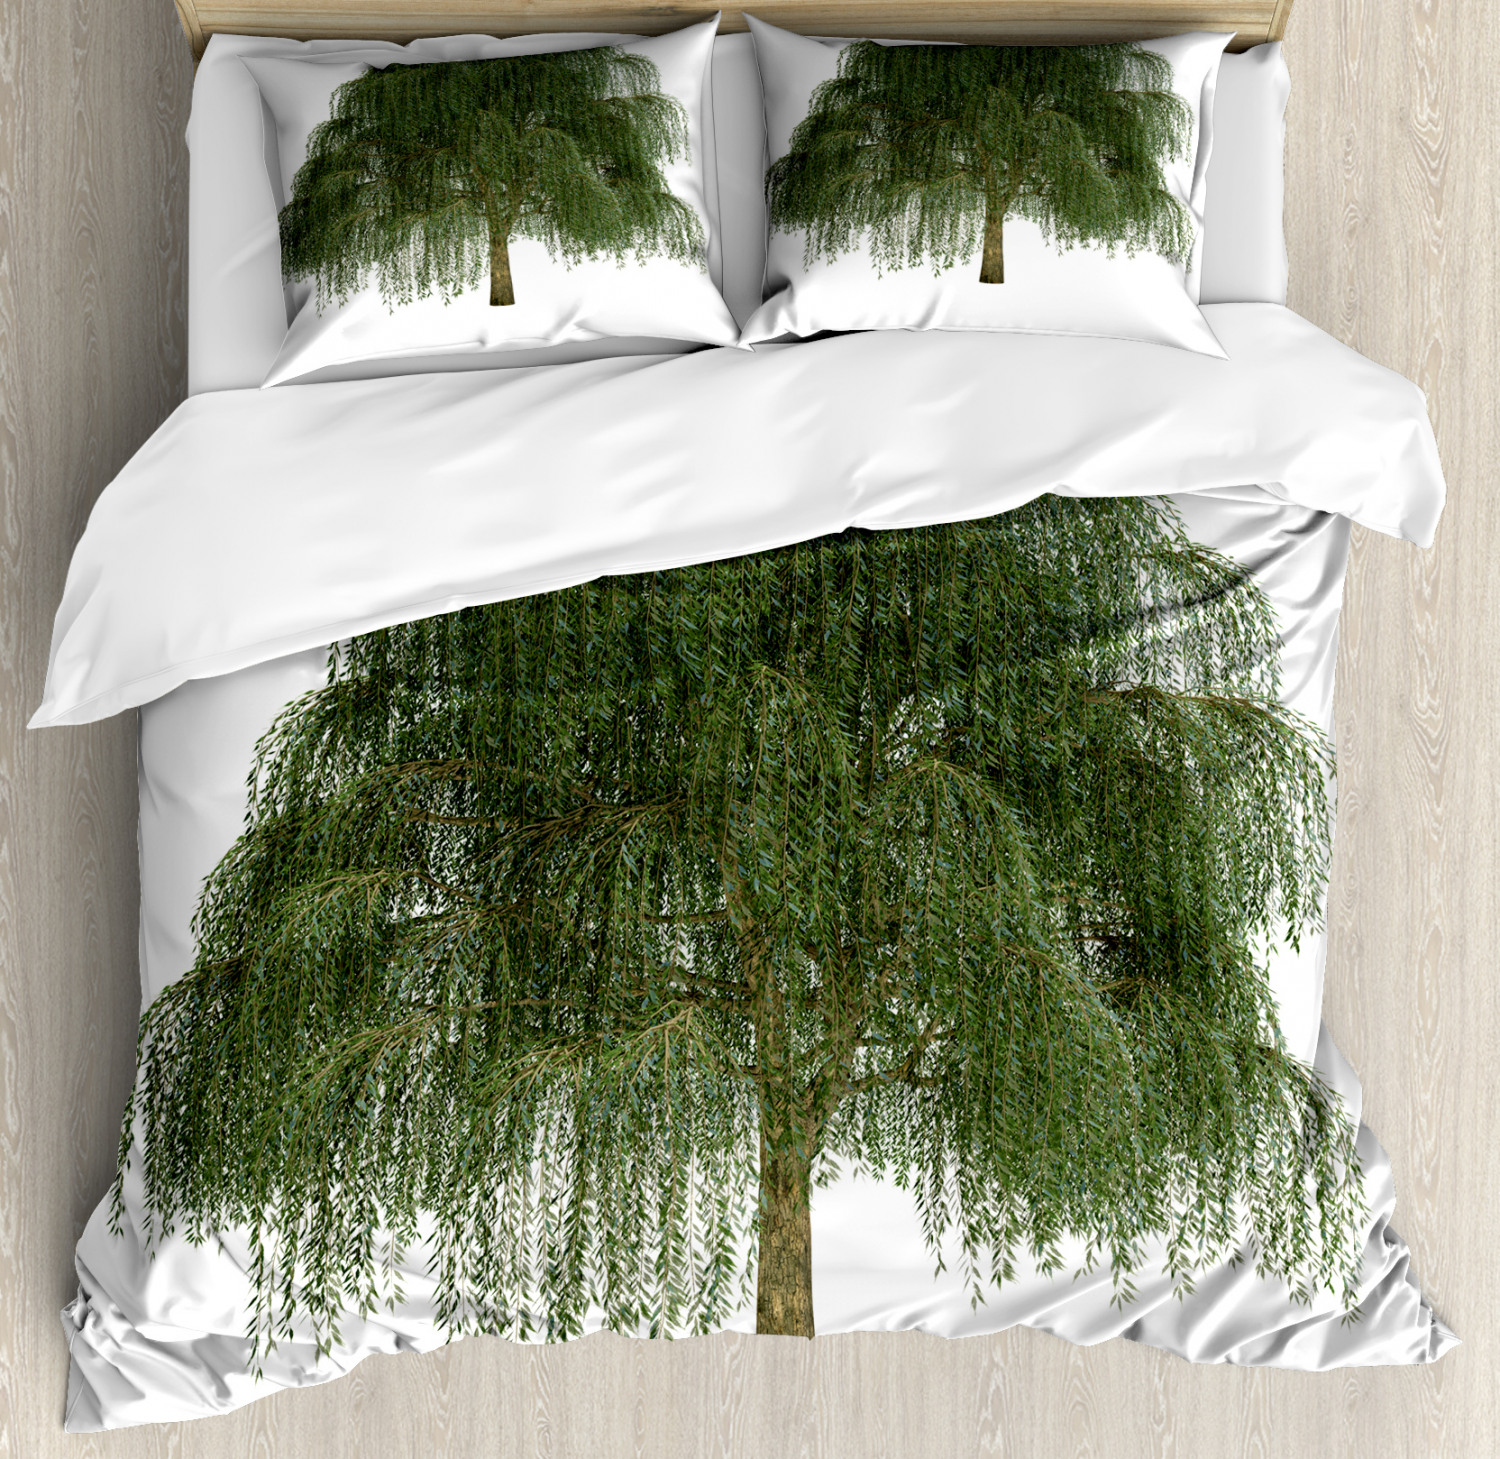 Willow Tree Duvet Cover Set King Size, Weeping Branches with Joyous Leaves Botanical Theme, 3 Piece Bedding Set with 2 Pillow Shams, Dark Green Olive Green and Green Brown, by Ambesonne - image 1 of 3